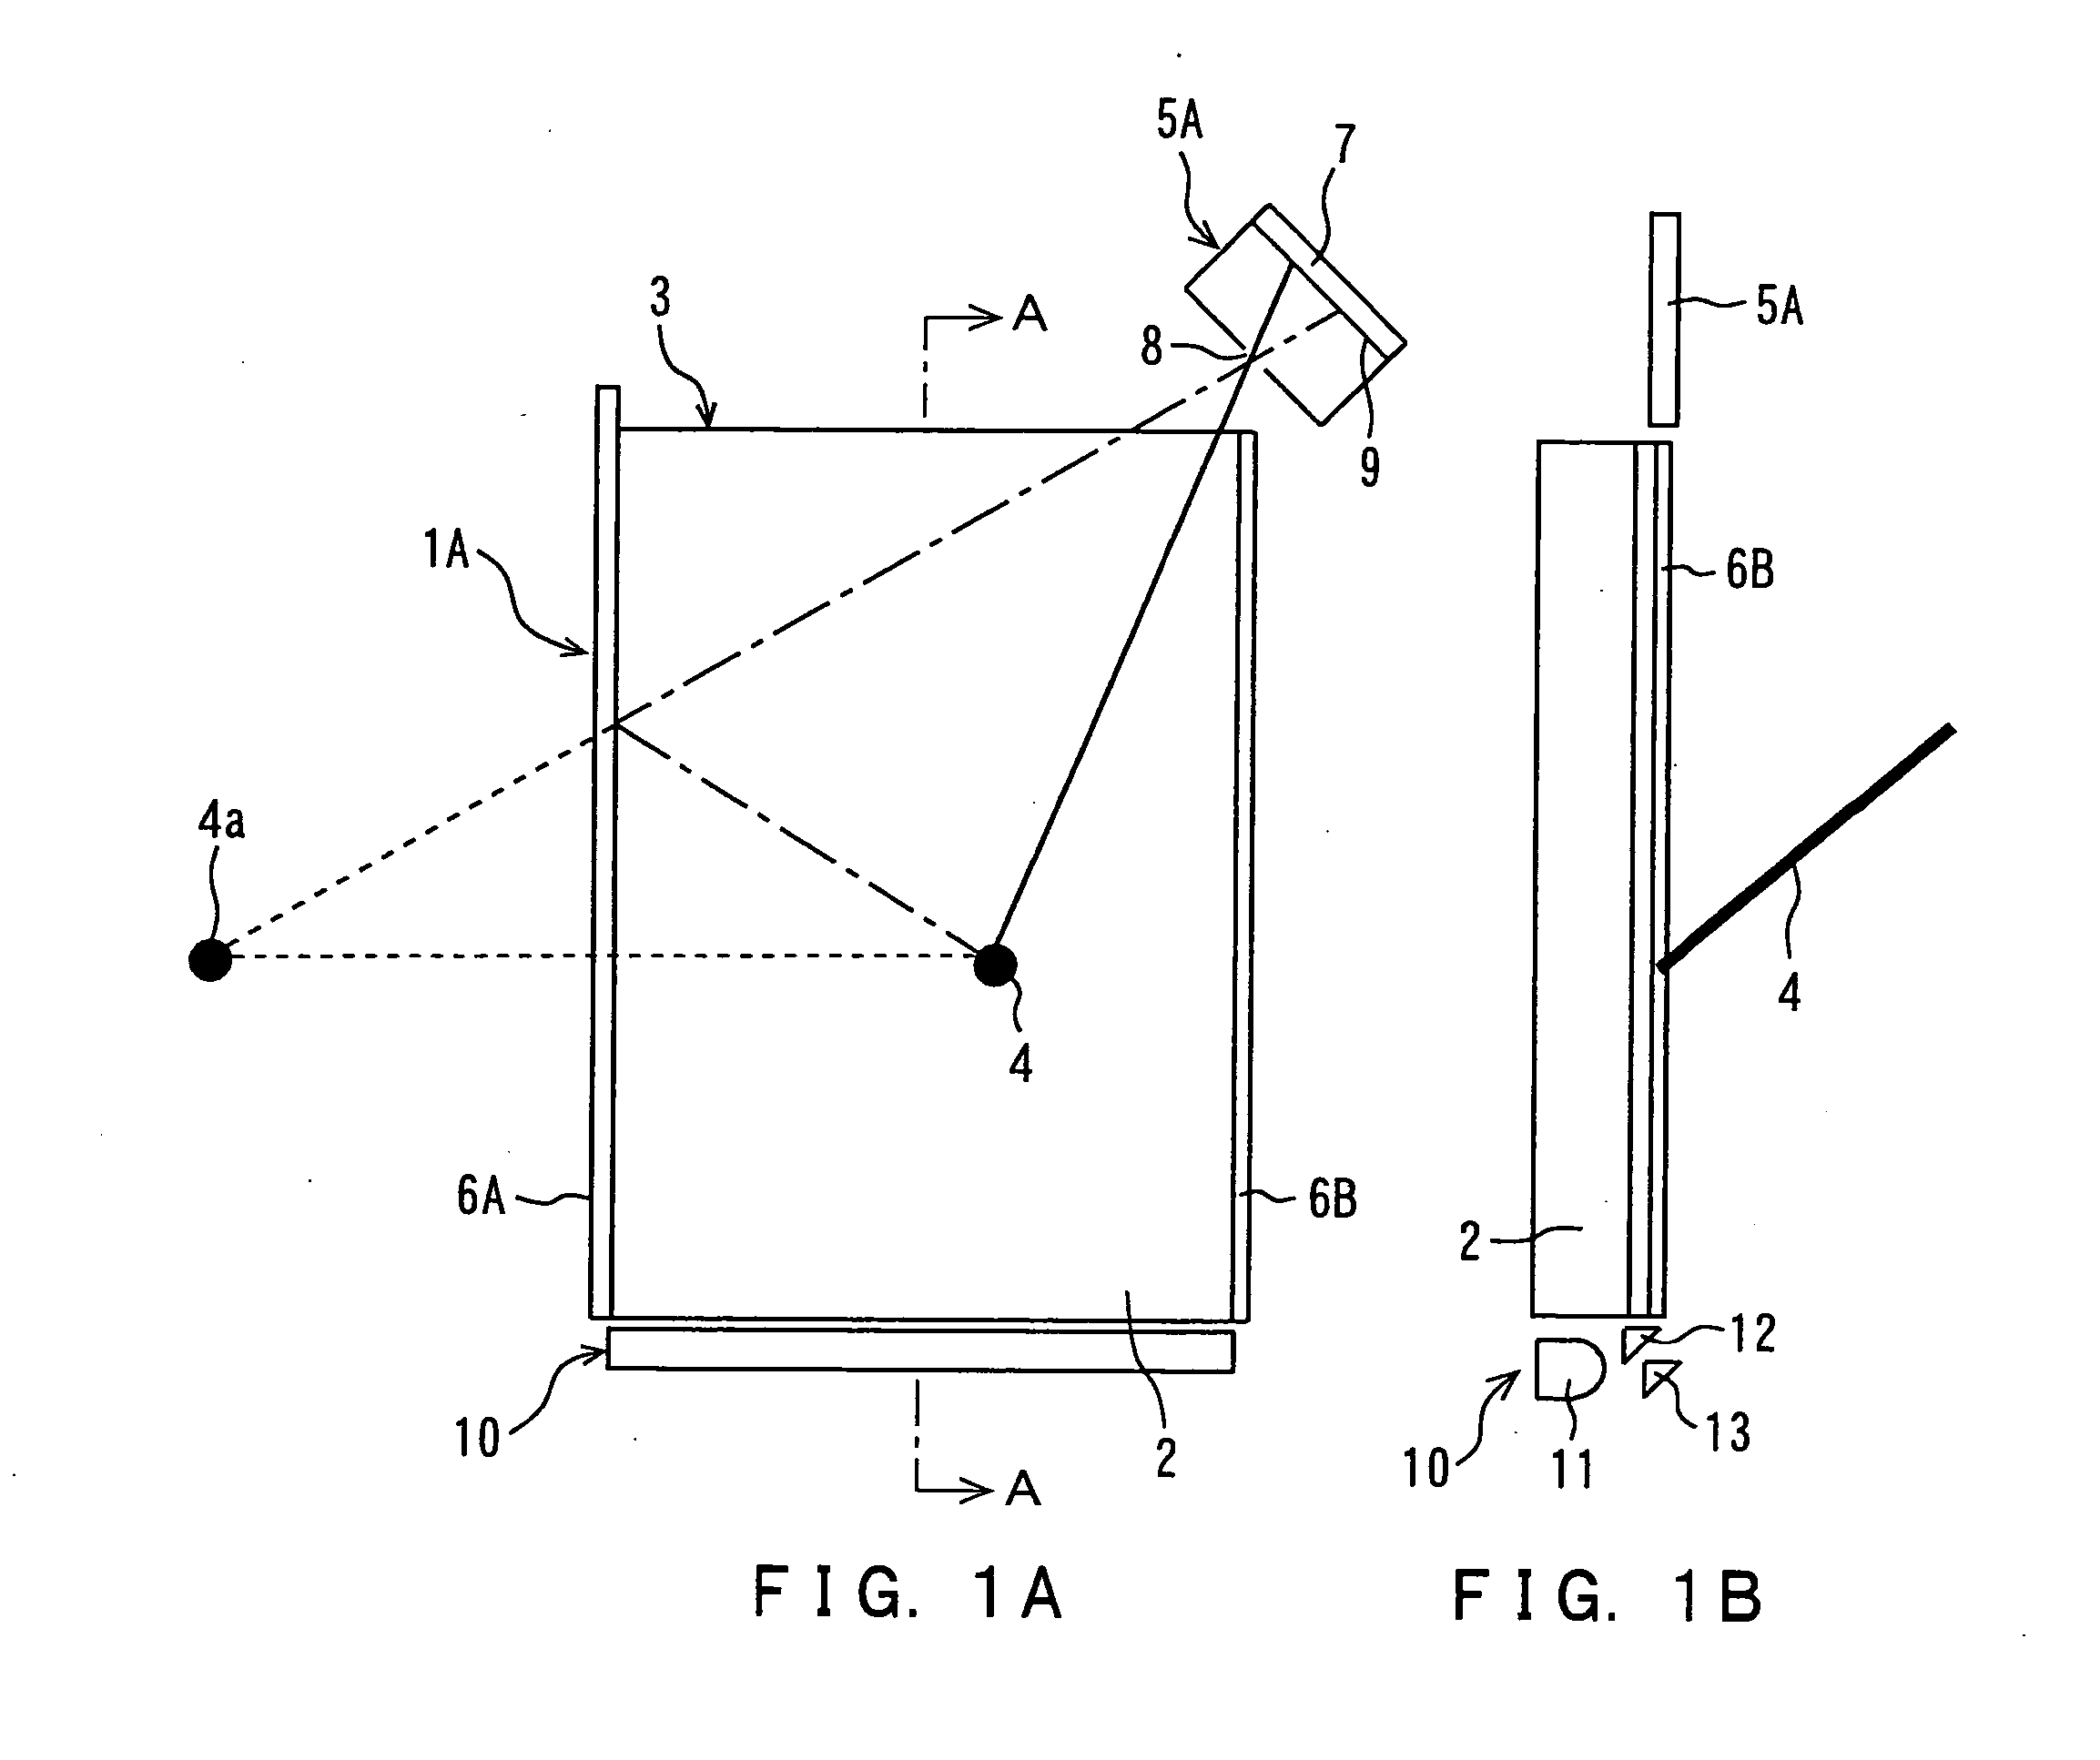 Position-detecting device